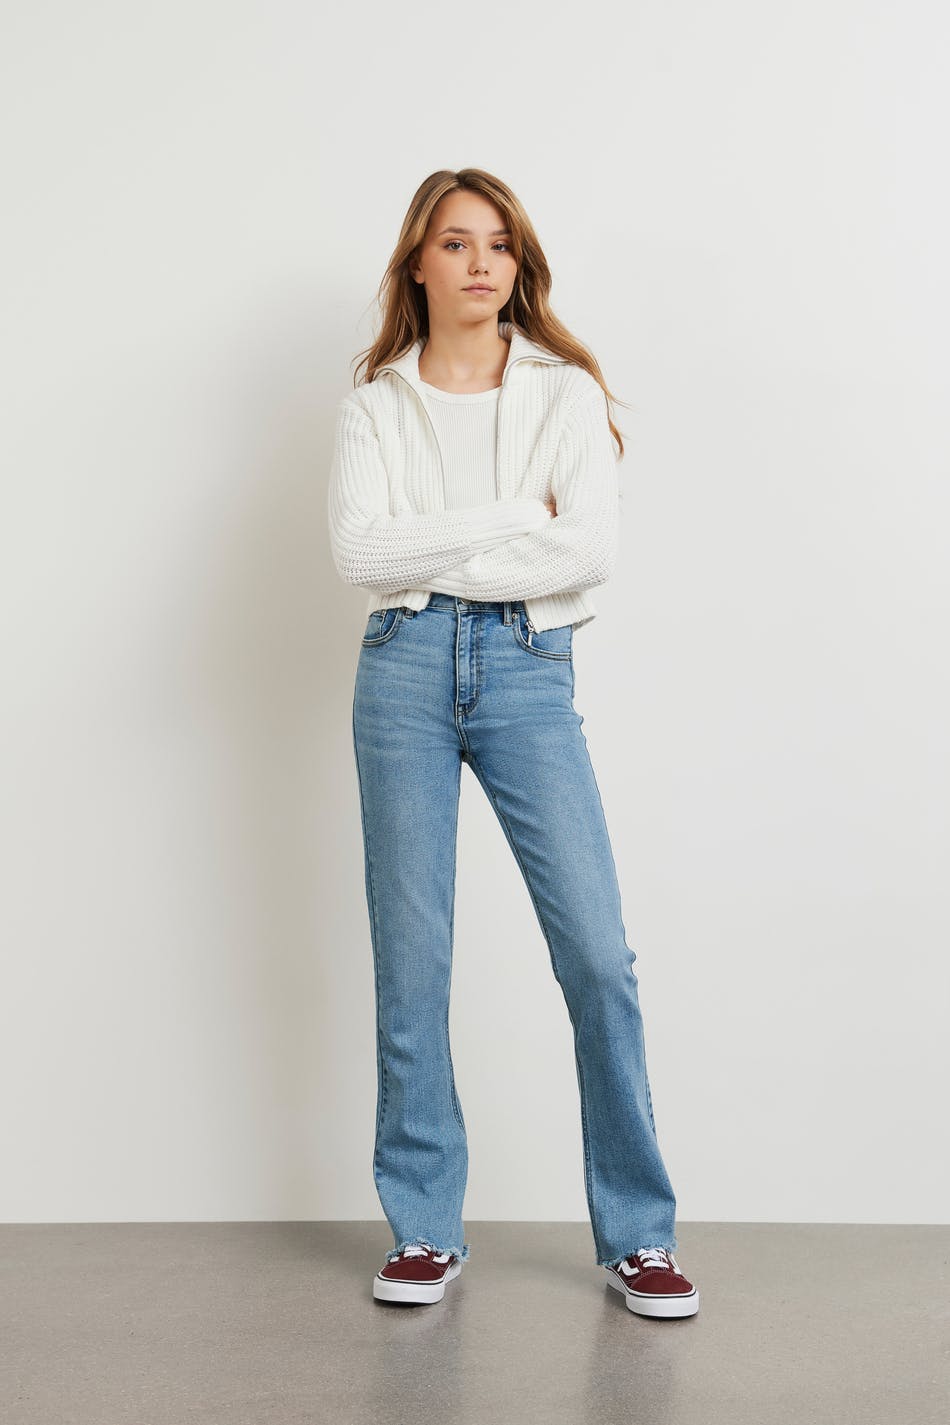 Flary jeans, Gina Tricot